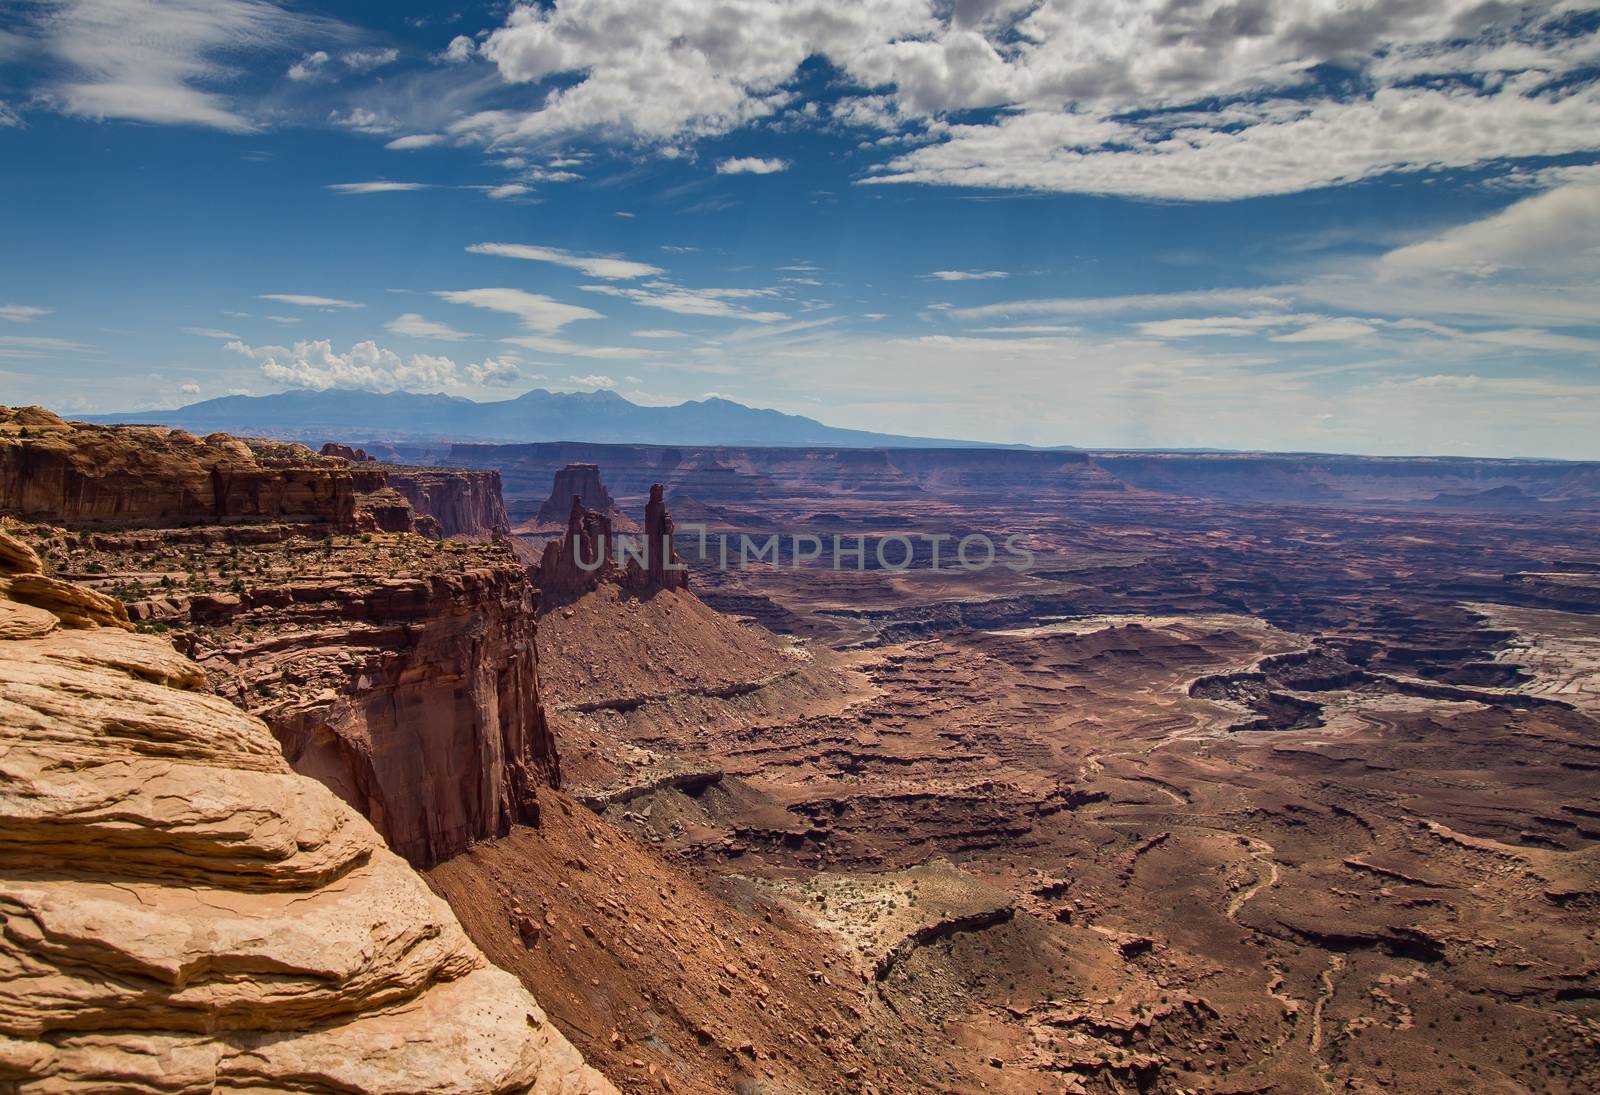 Dead Horse Point Overlook in Dead Horse Point State Park, Utah.